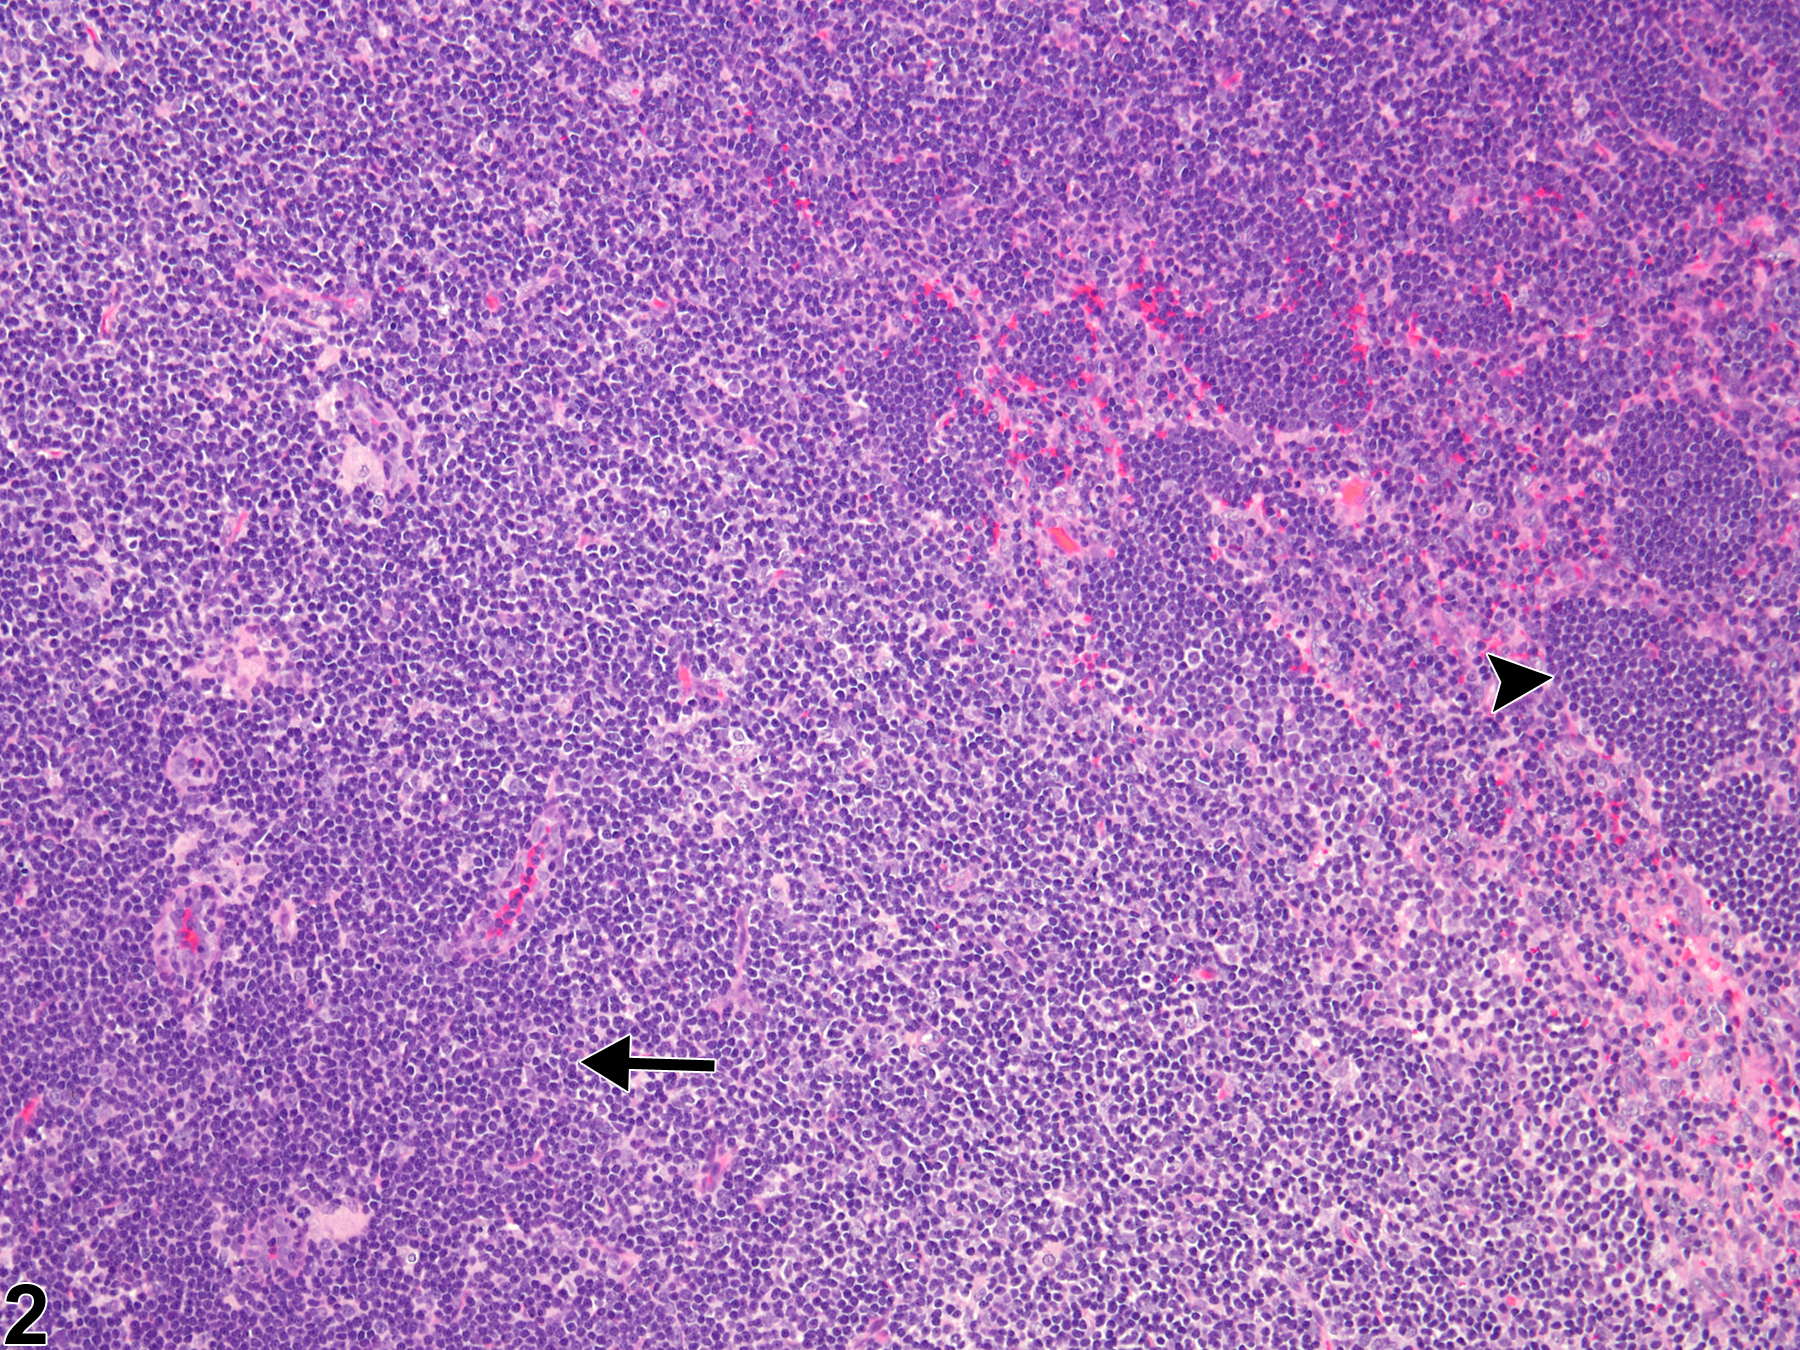 Image of hyperplasia, lymphocyte in the lymph node from a male B6C3F1/N mouse in a subchronic study